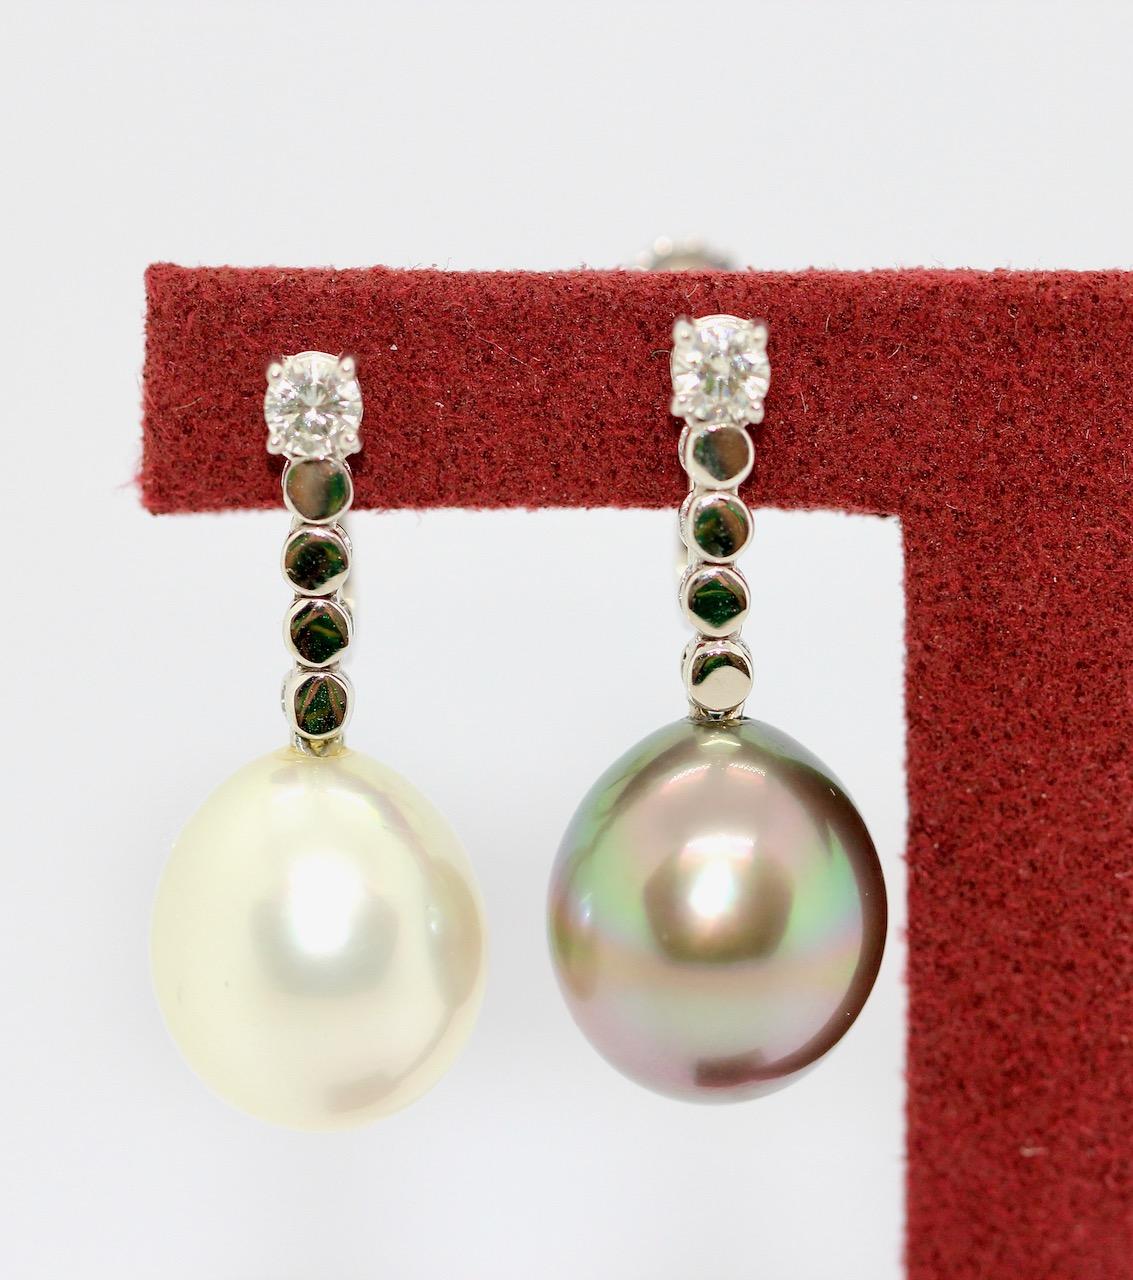 Charming diamond earrings set with natural white and gray South Sea pearl, Tahitian pearl. 18 Karat White Gold.

The Pearls each have a diameter of approx. 11.8 mm

Includes certificate of authenticity.